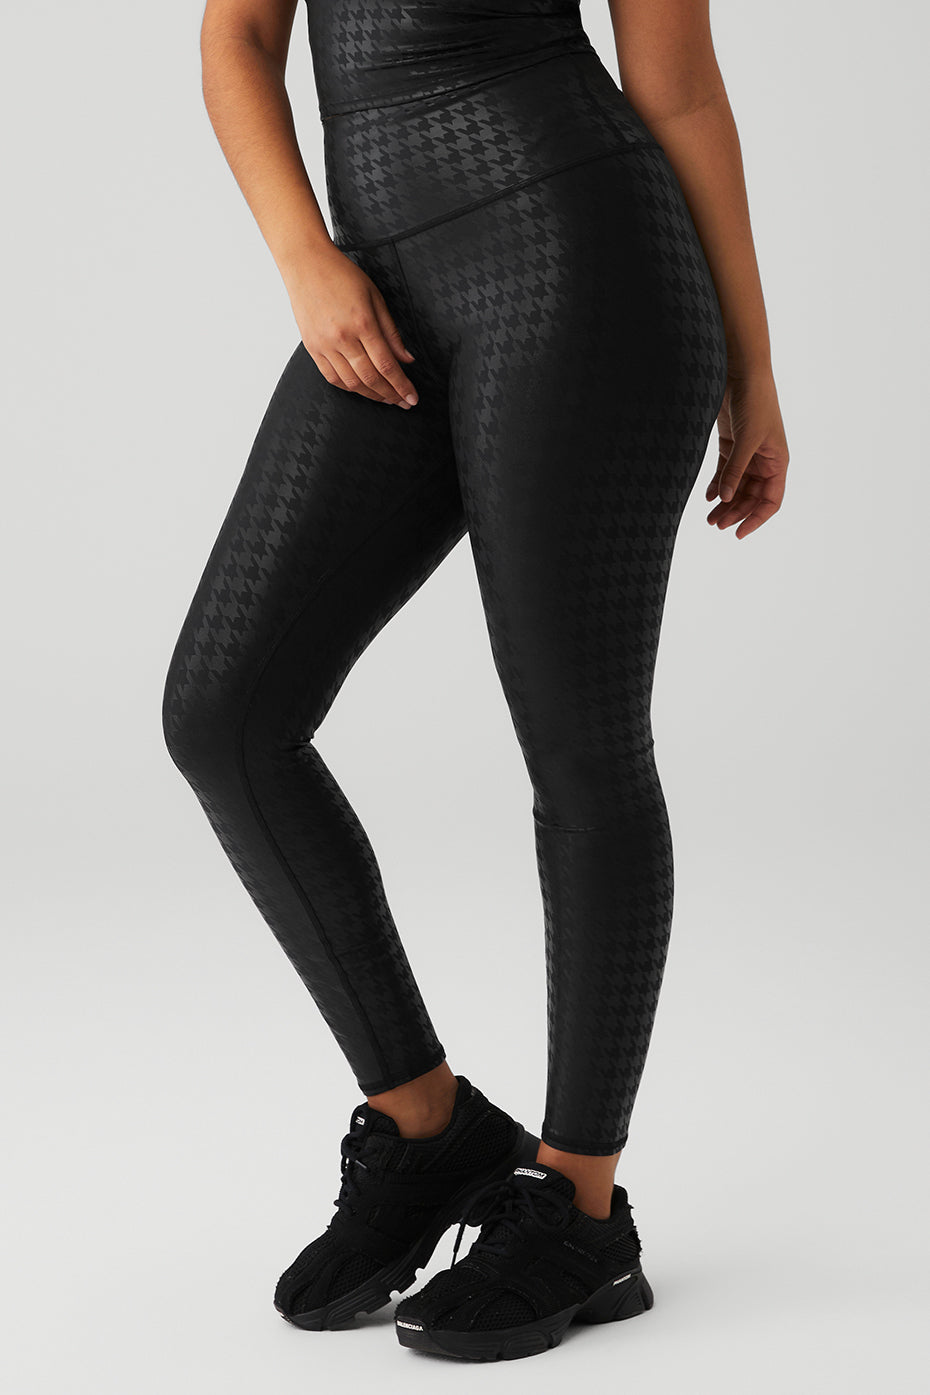 Buy Alo Yoga Women's Accelerate Legging, Rich Navy Houndstooth